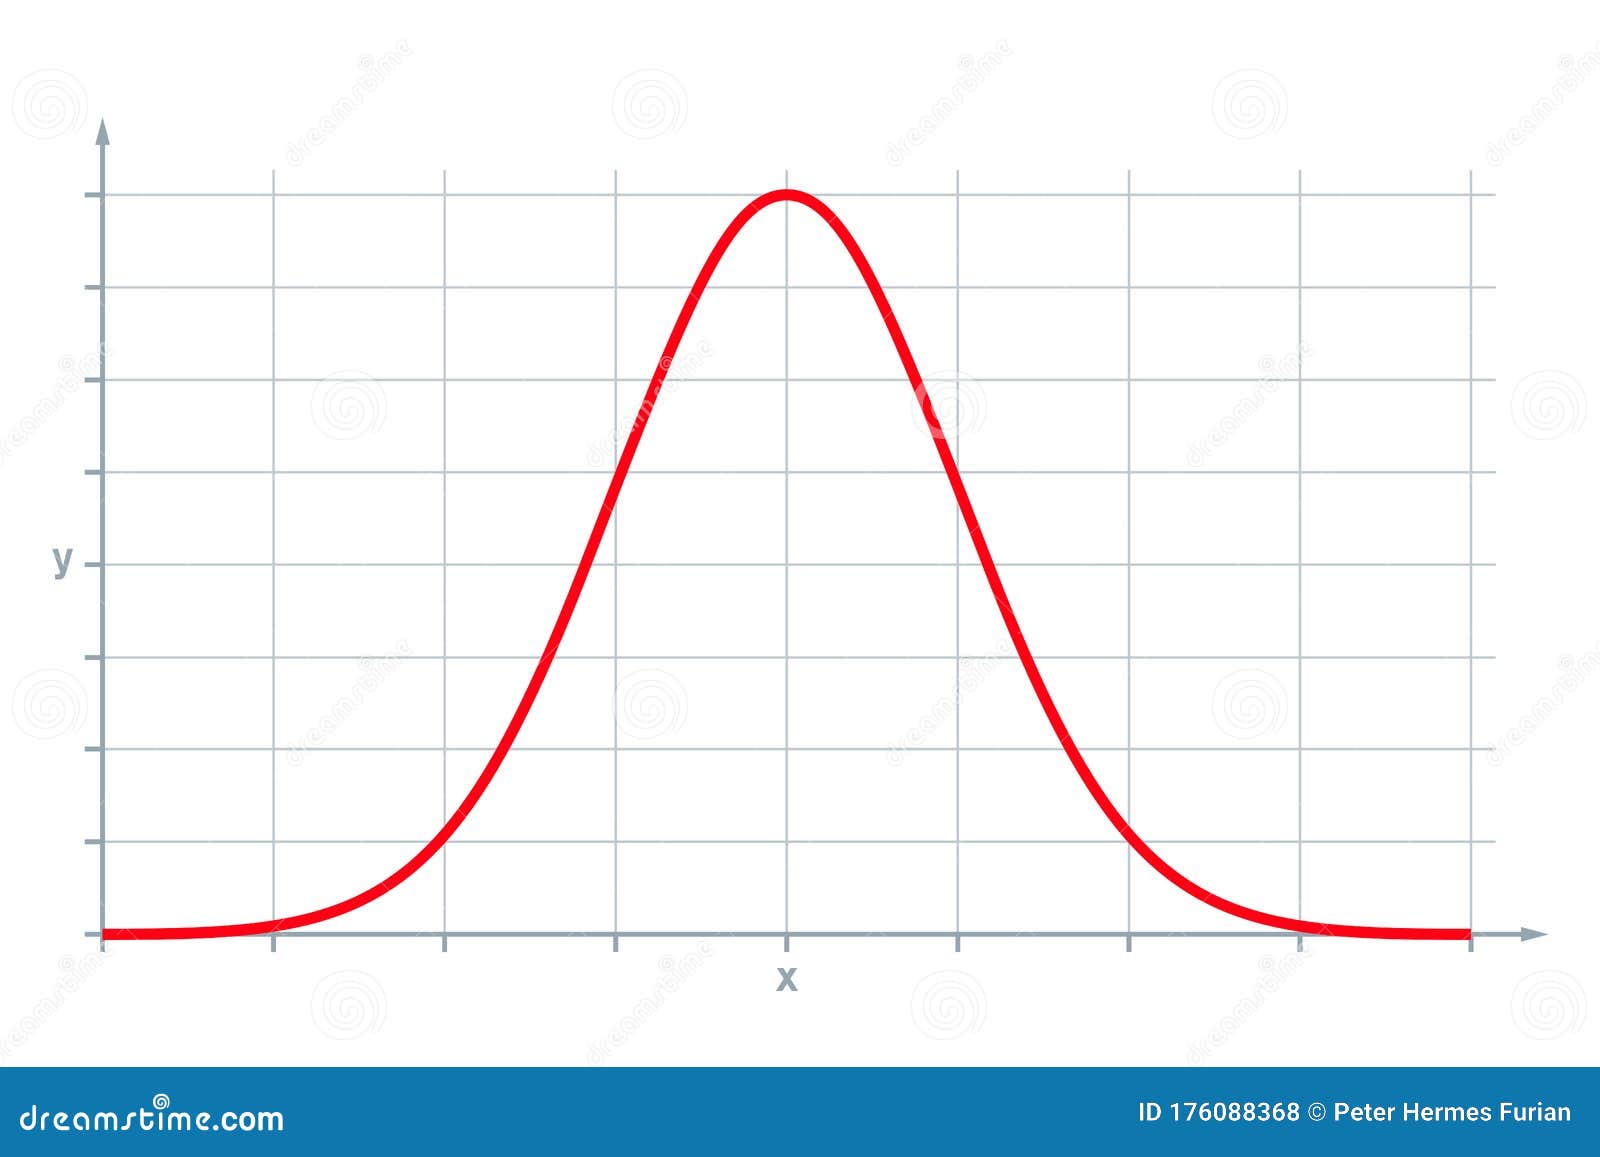 standard normal distribution, also gaussian distribution or bell curve